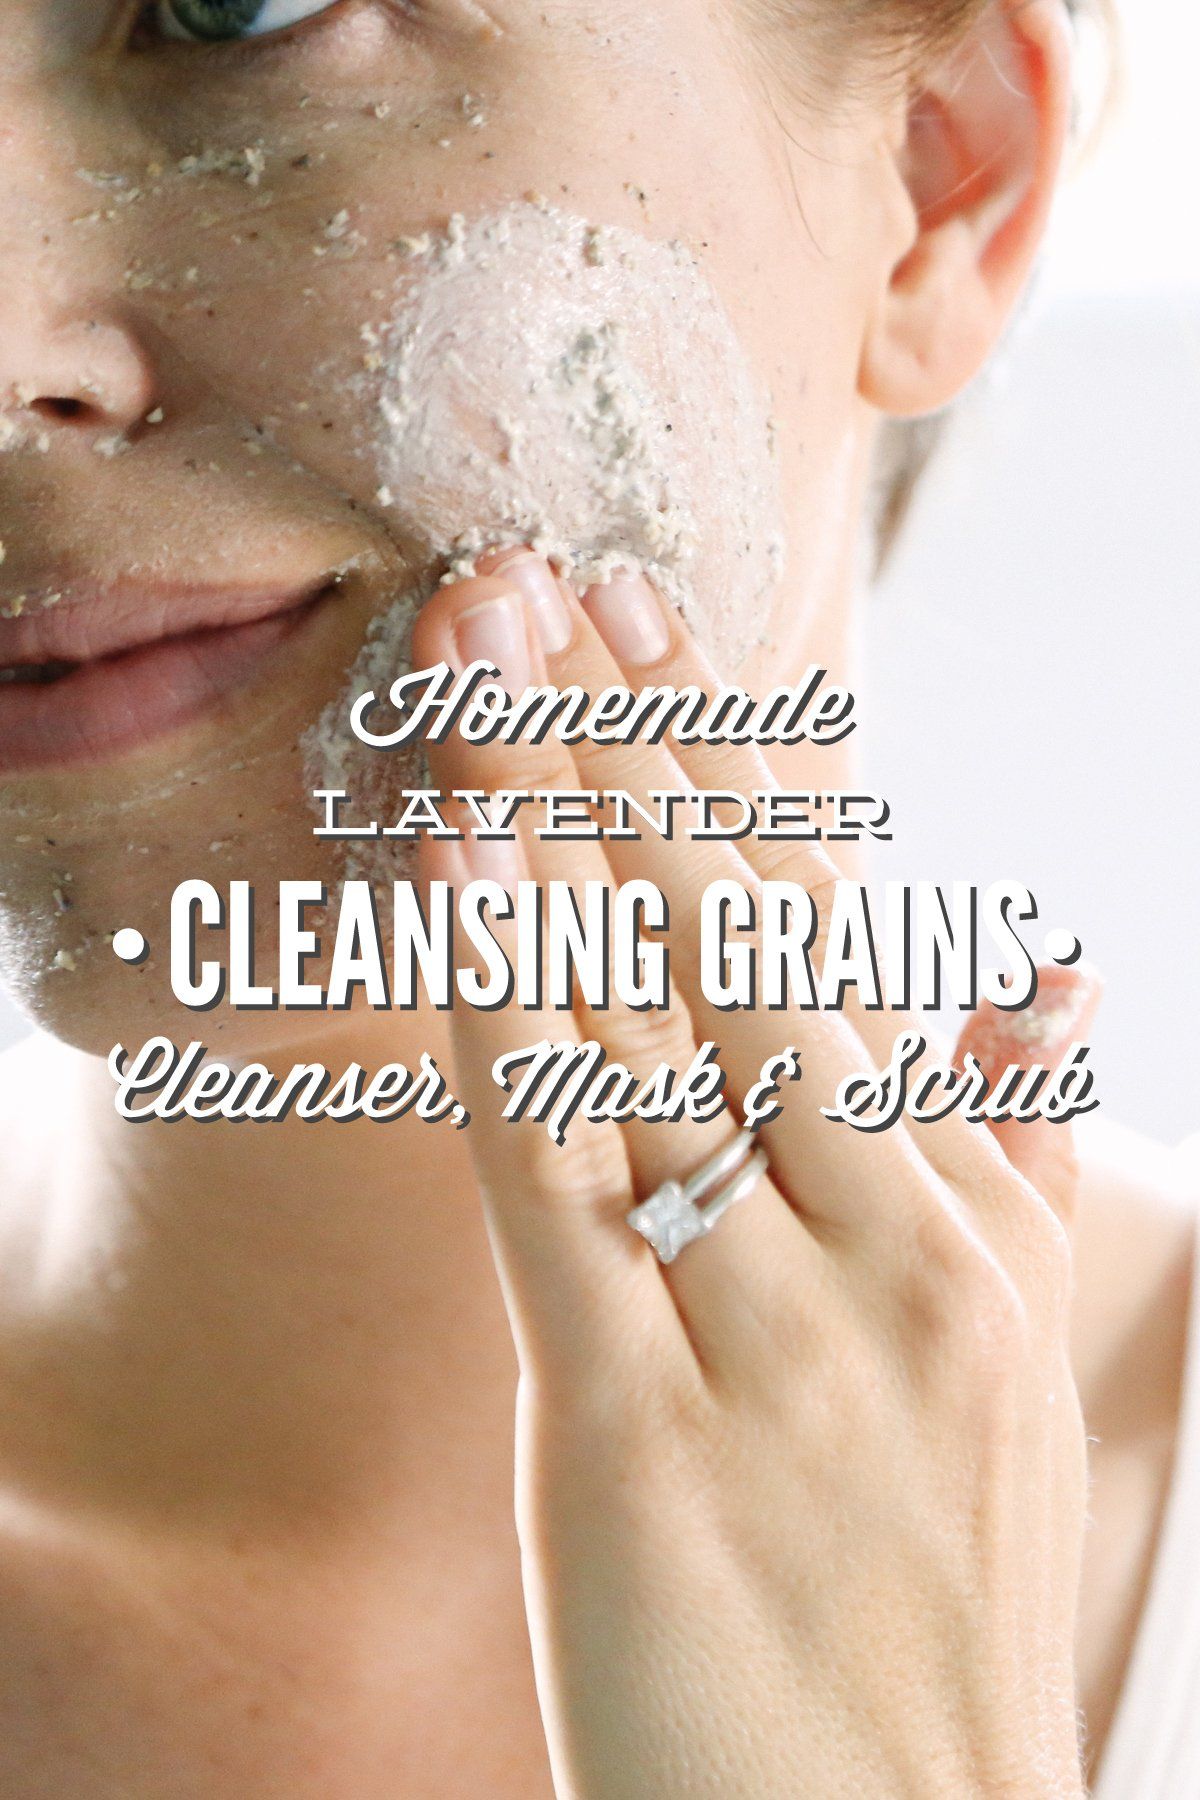 The S. reccomend Facial cleansing grains